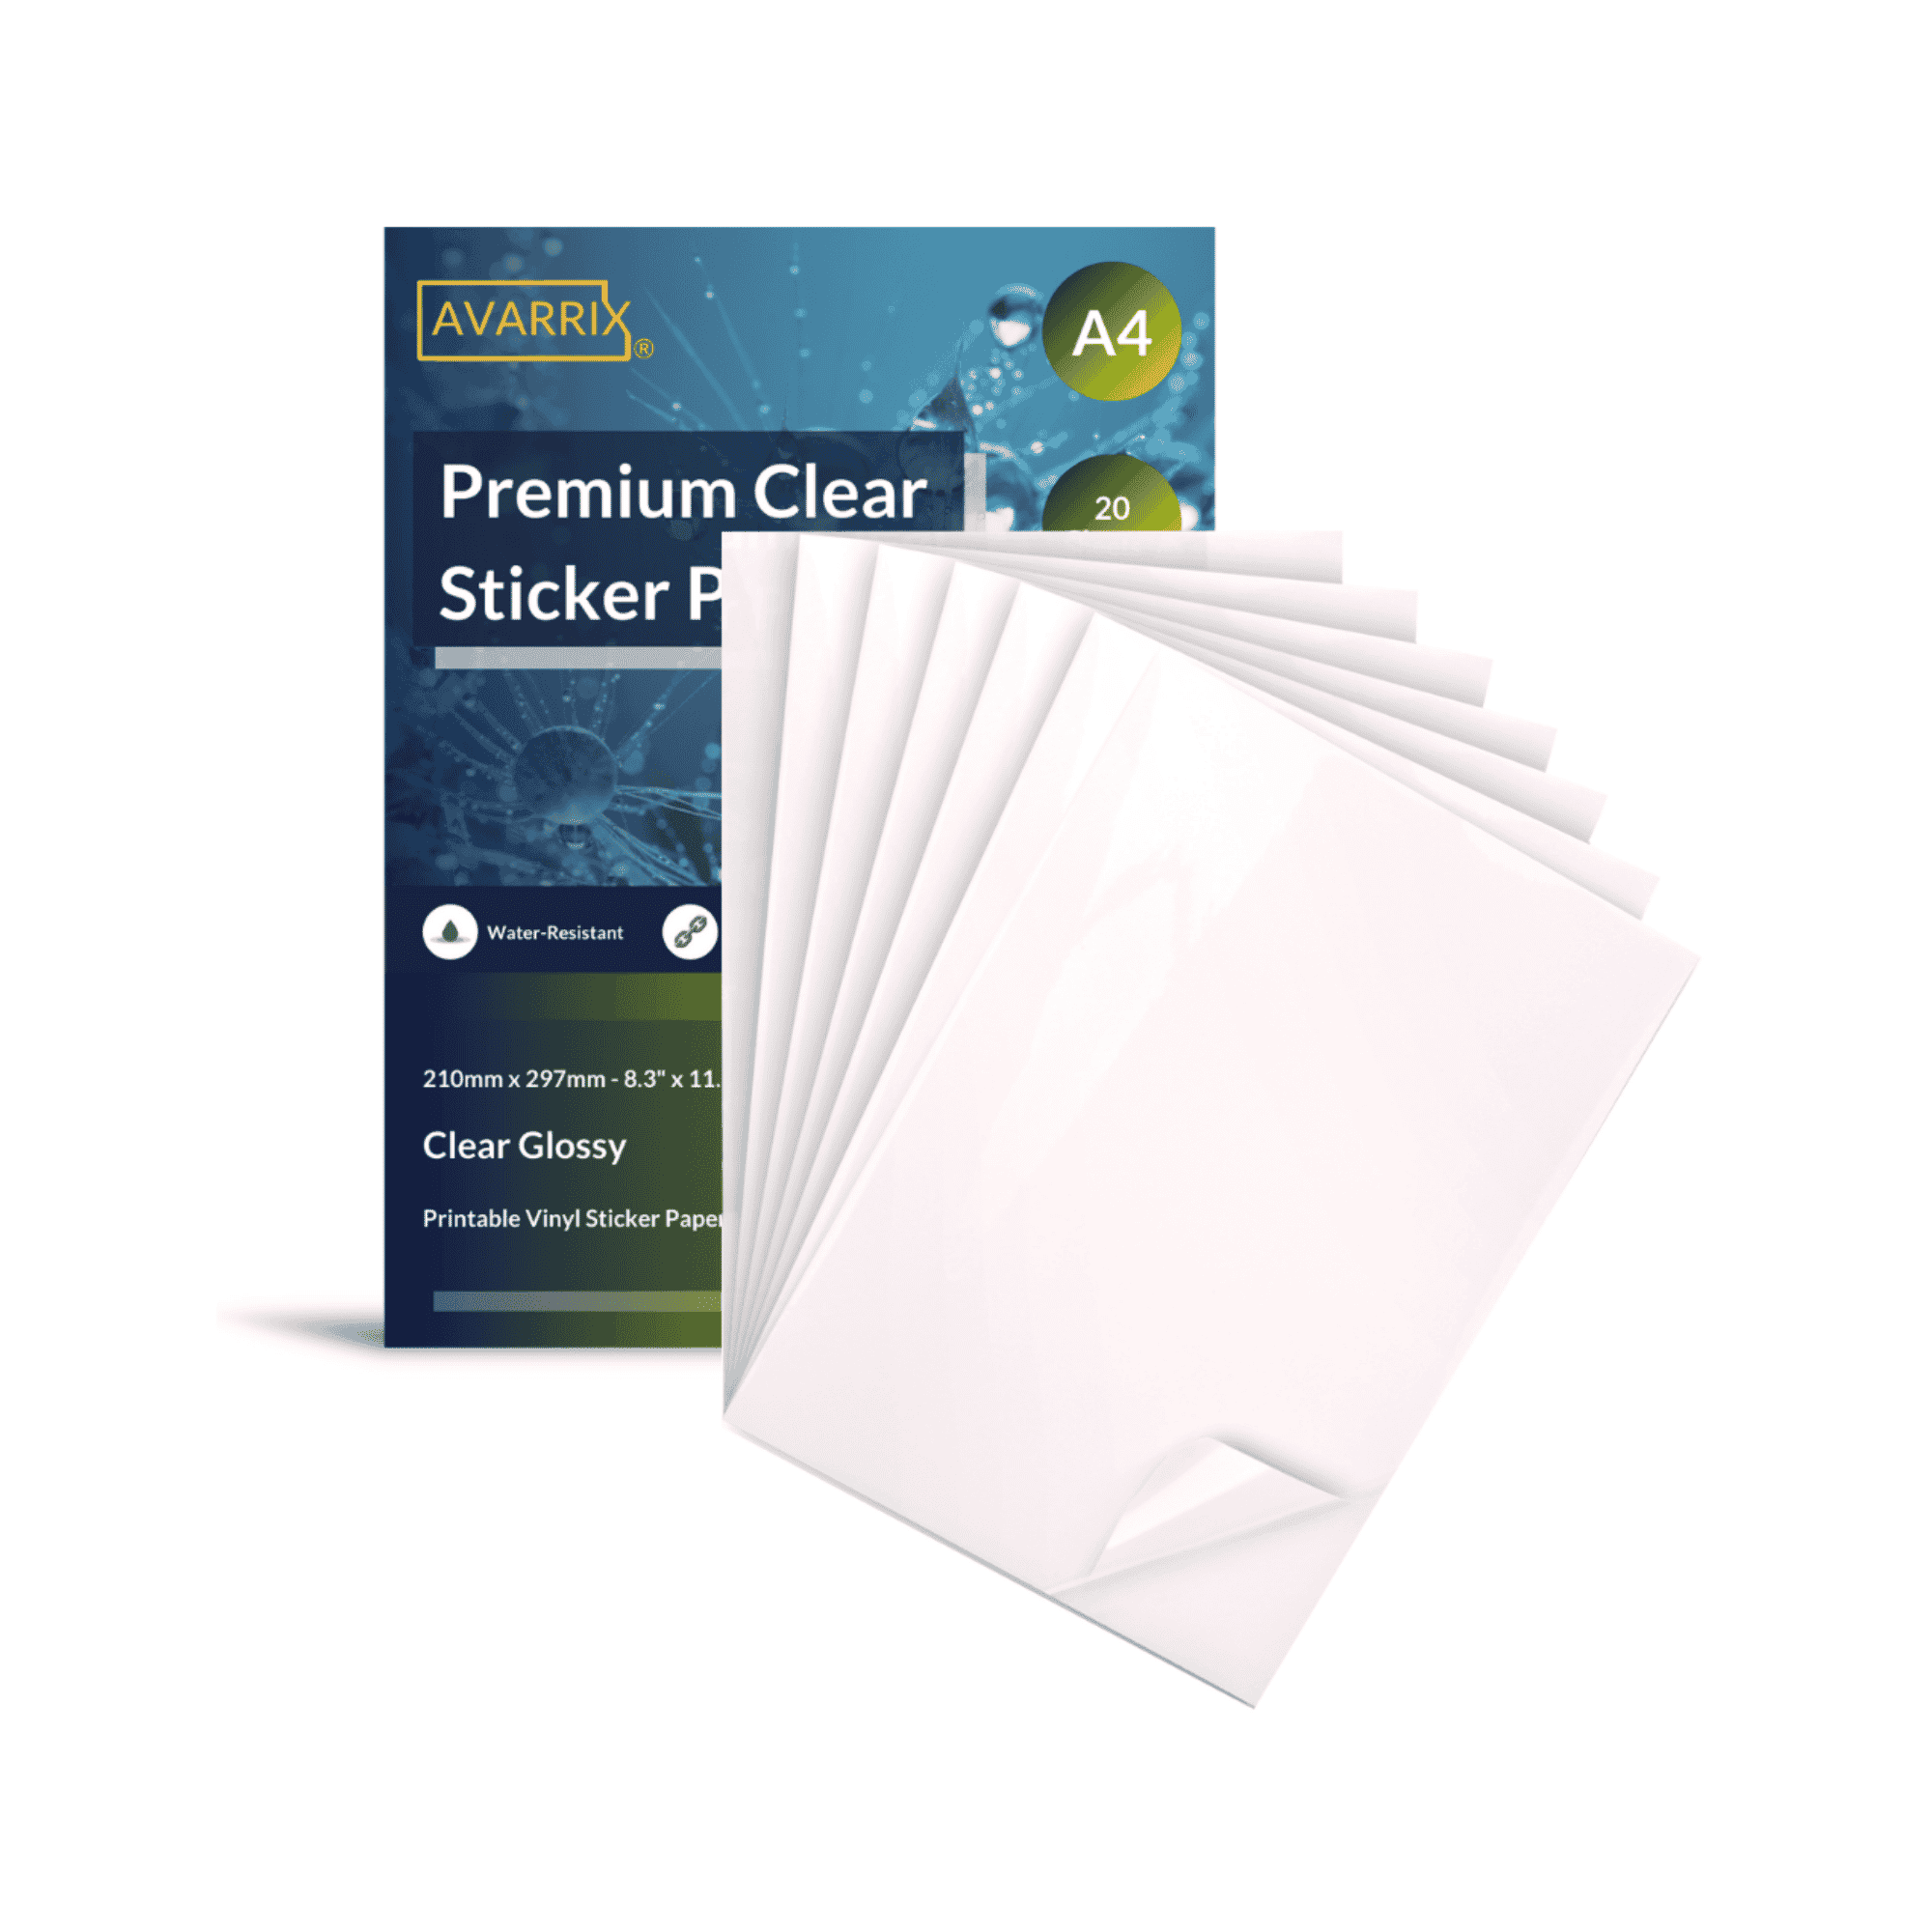 Waterproof Printable Vinyl Stickers Paper for Inkjet Printer- 20 Matte  White Decal Paper Cricut Sheets A4 - Holds Ink Beautifully & Dries Quickly